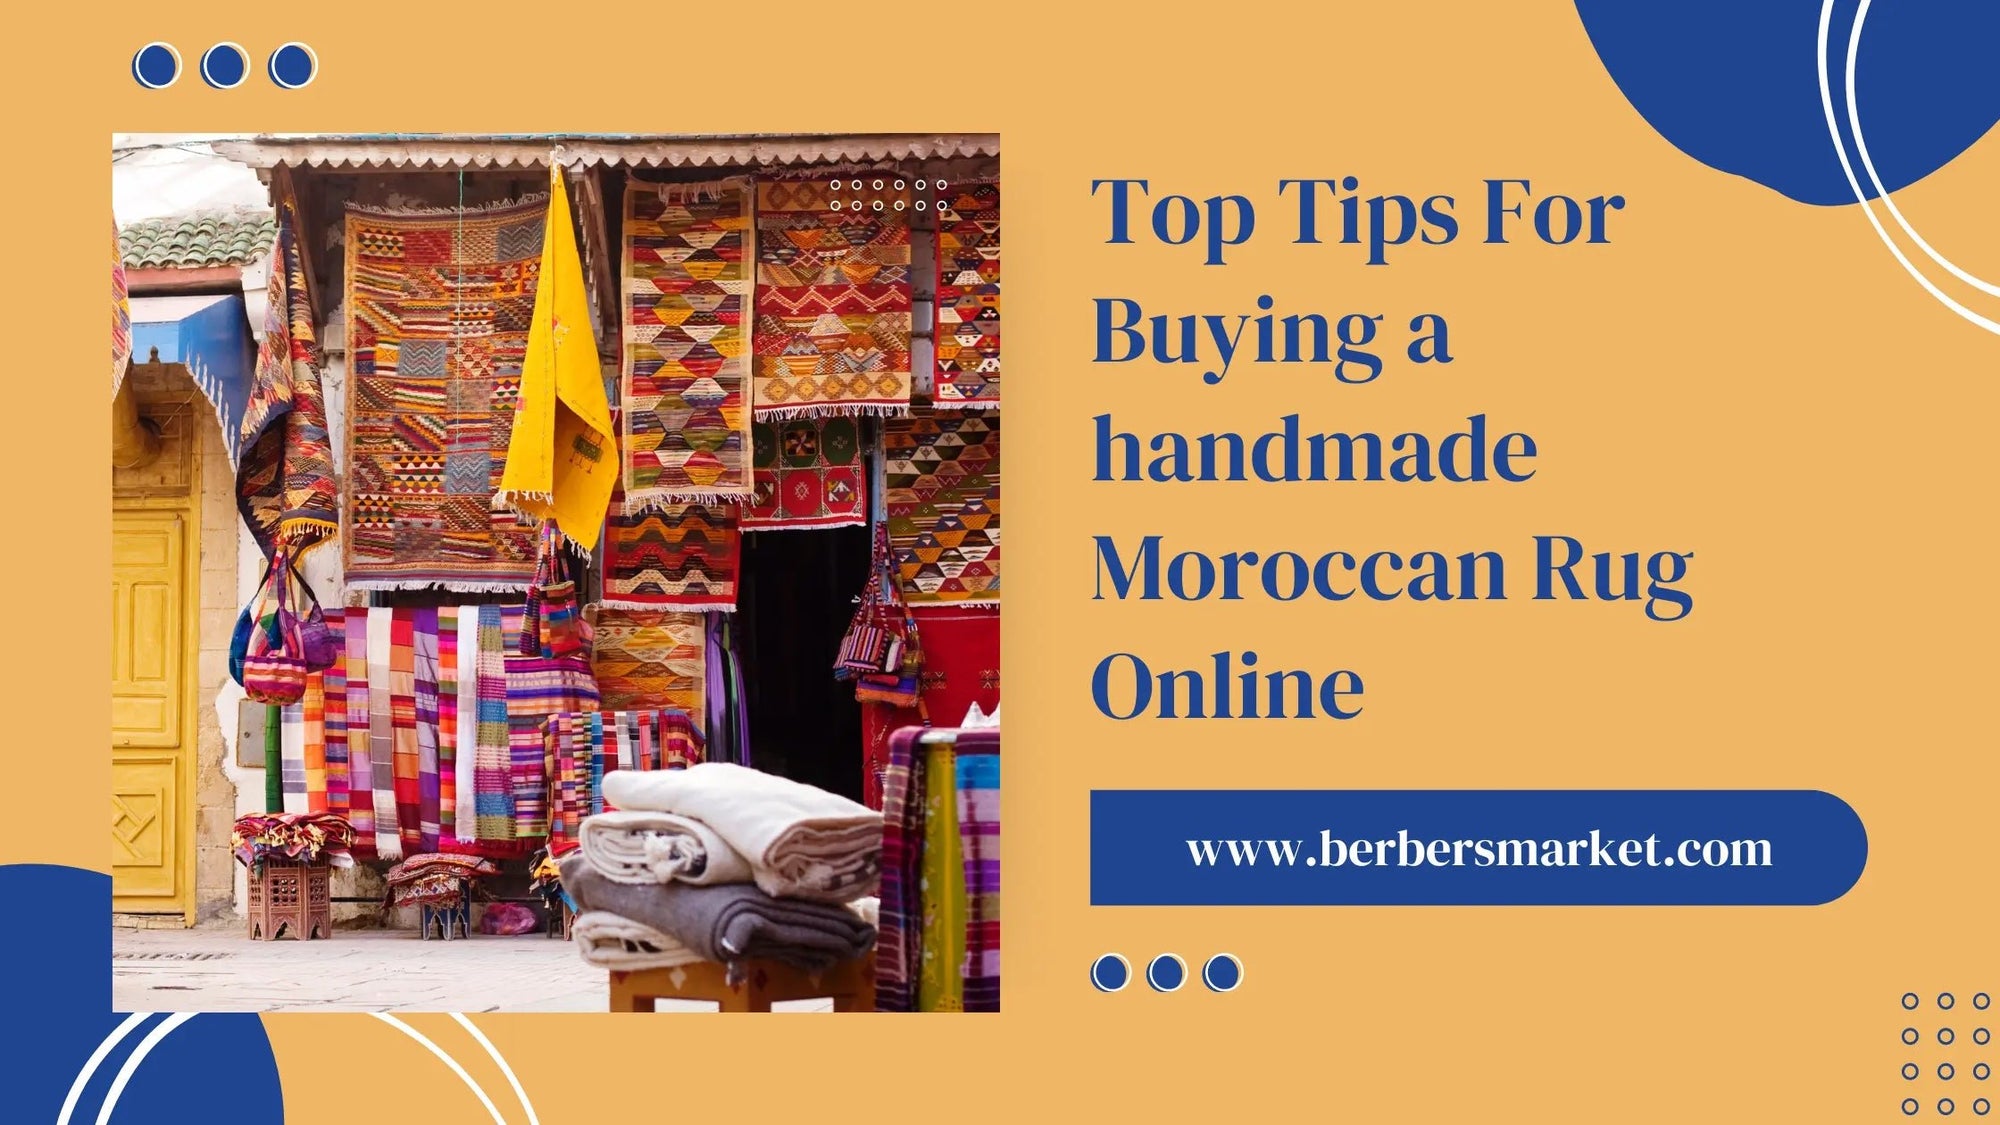 Top Tips For Buying a handmade Moroccan Rug Online - Berbers Market